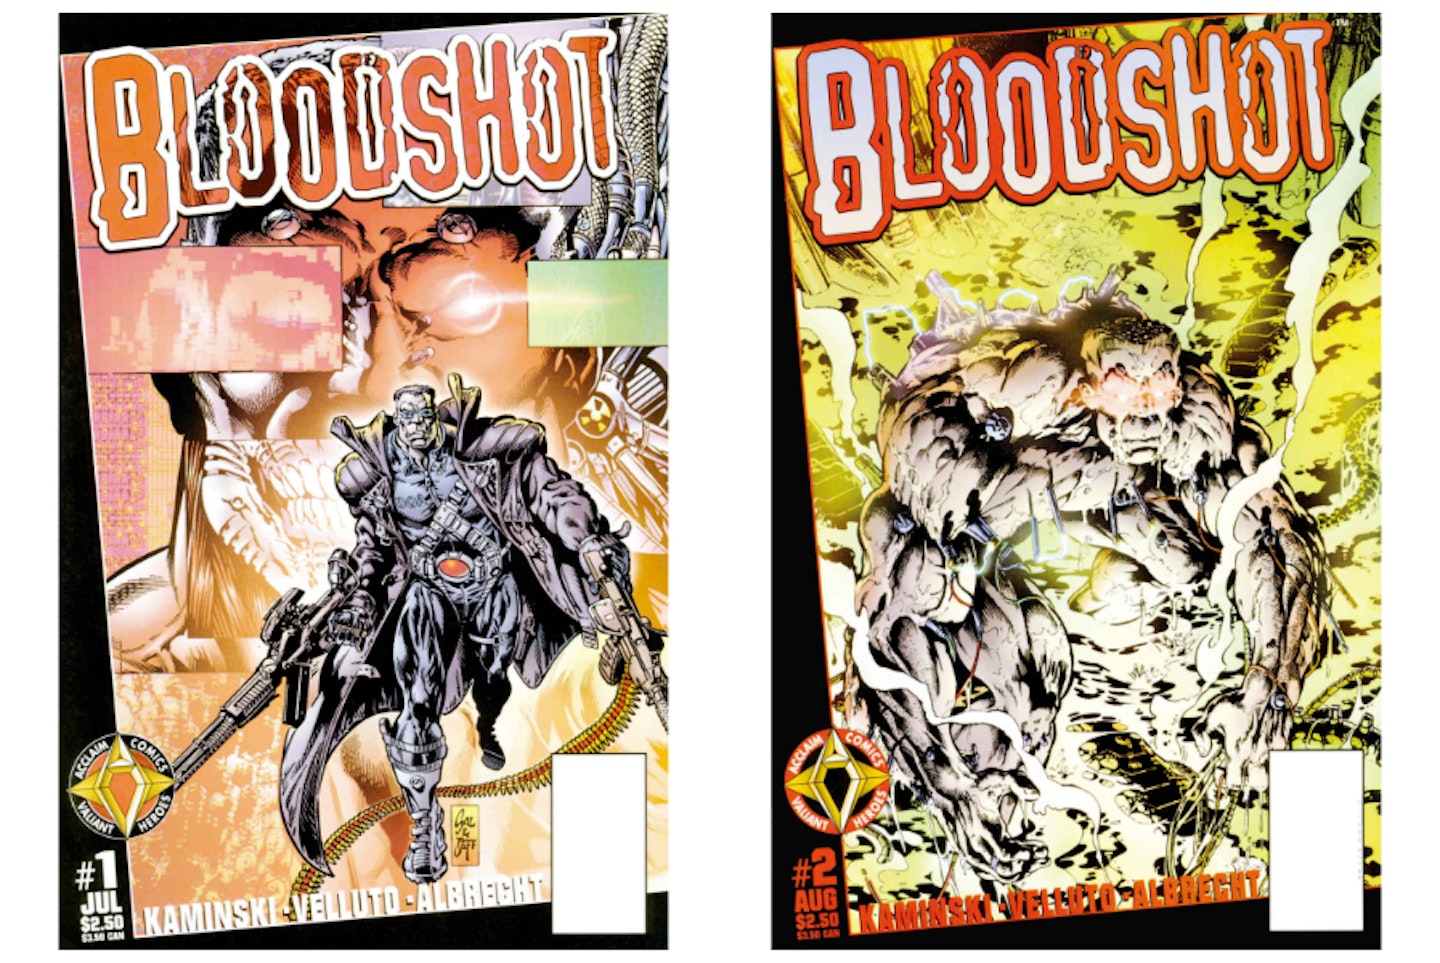 Bloodshot Volume 2, from £1.79 per issue (Kindle)